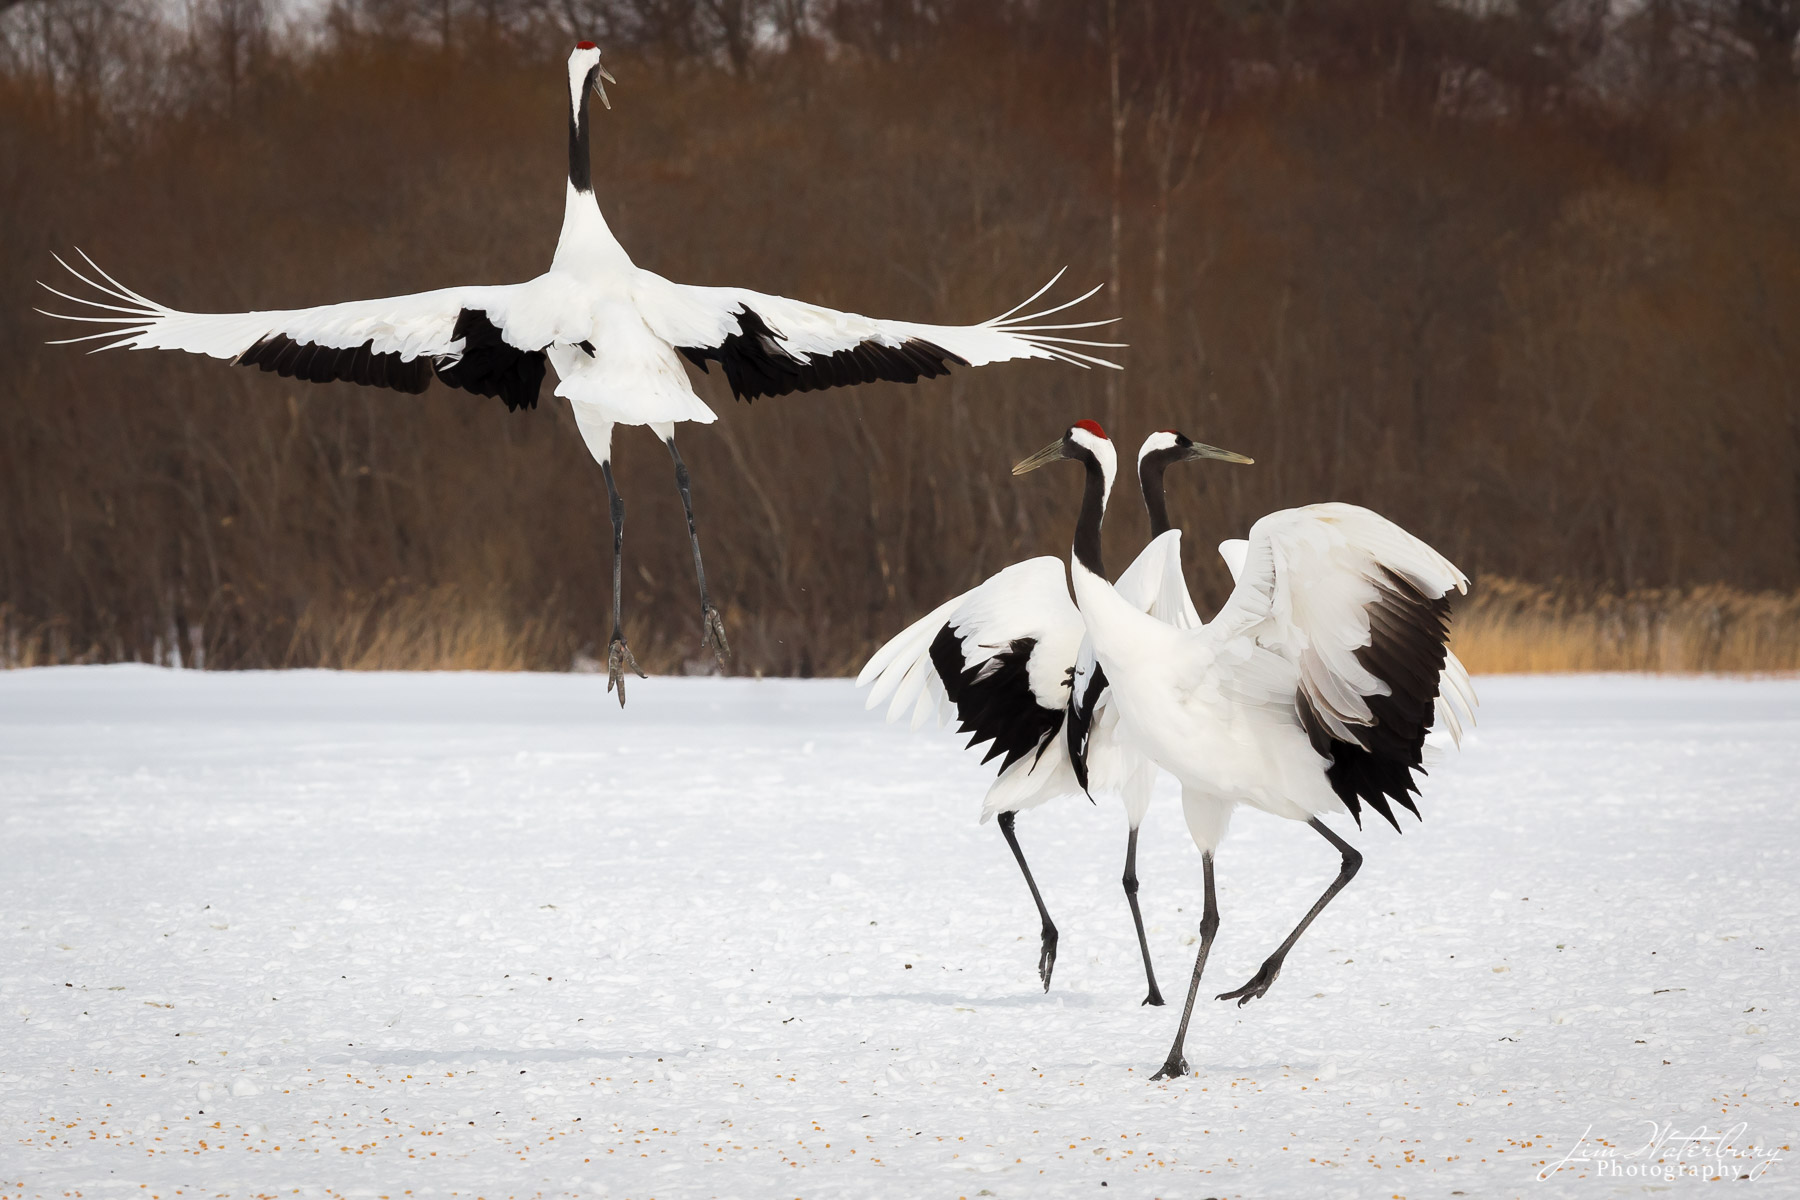 Japanese red-crowned cranes dance in the winter snow near Tsurui, Hokkaido.  The Red-crowned Crane, also called the Japanese...